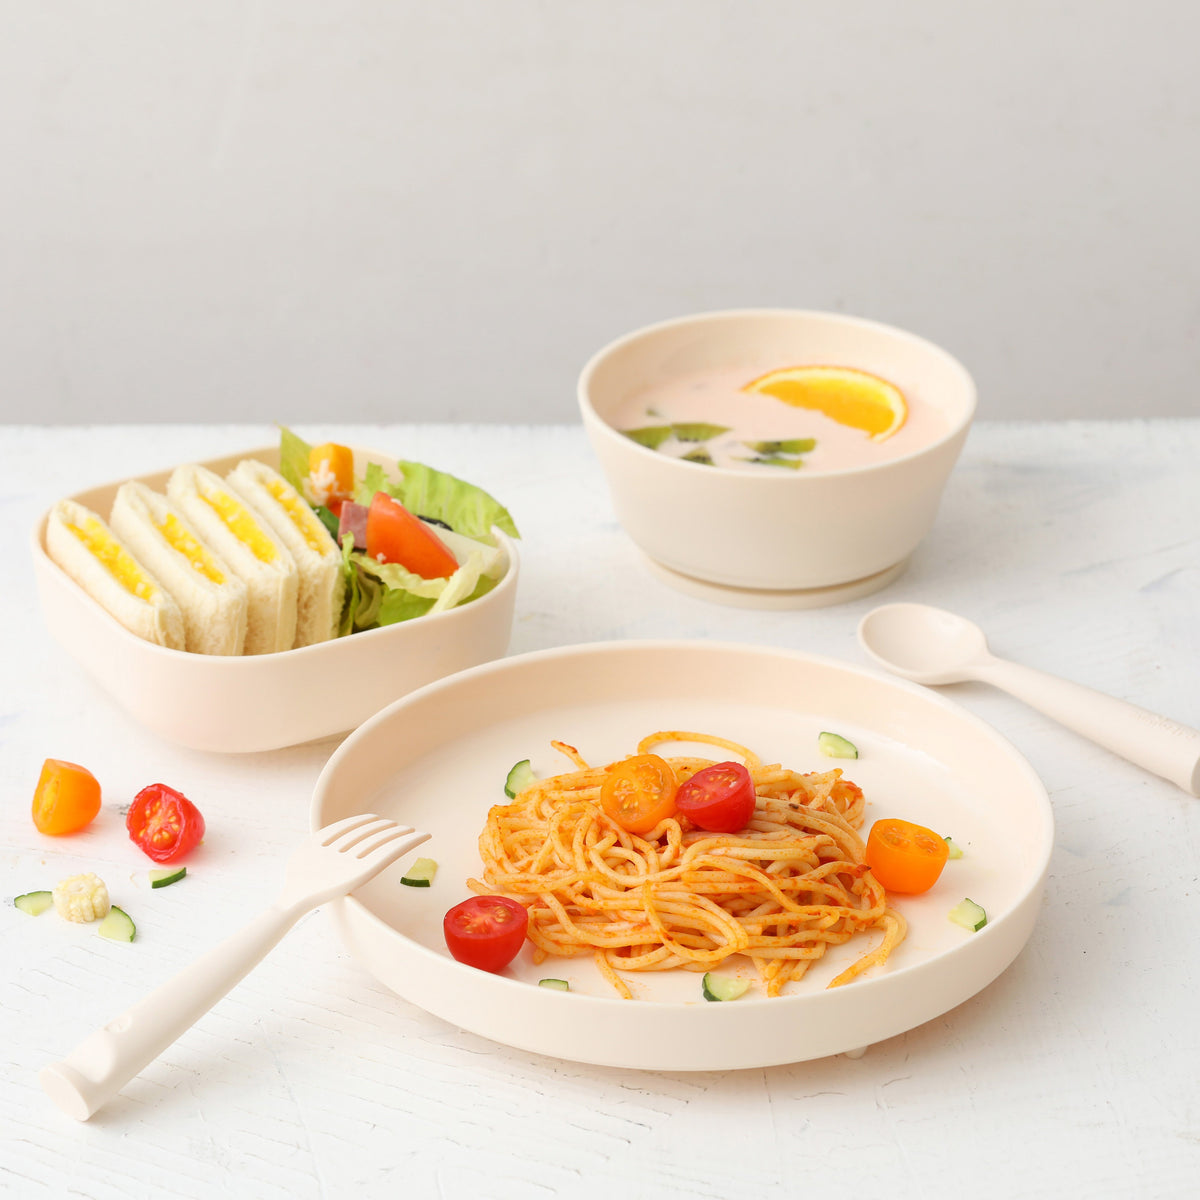 miniware-healthy-meal-set-pla-smart-divider-suction-plate-in-vanilla-+-silicone-divider-in-peach- (30)